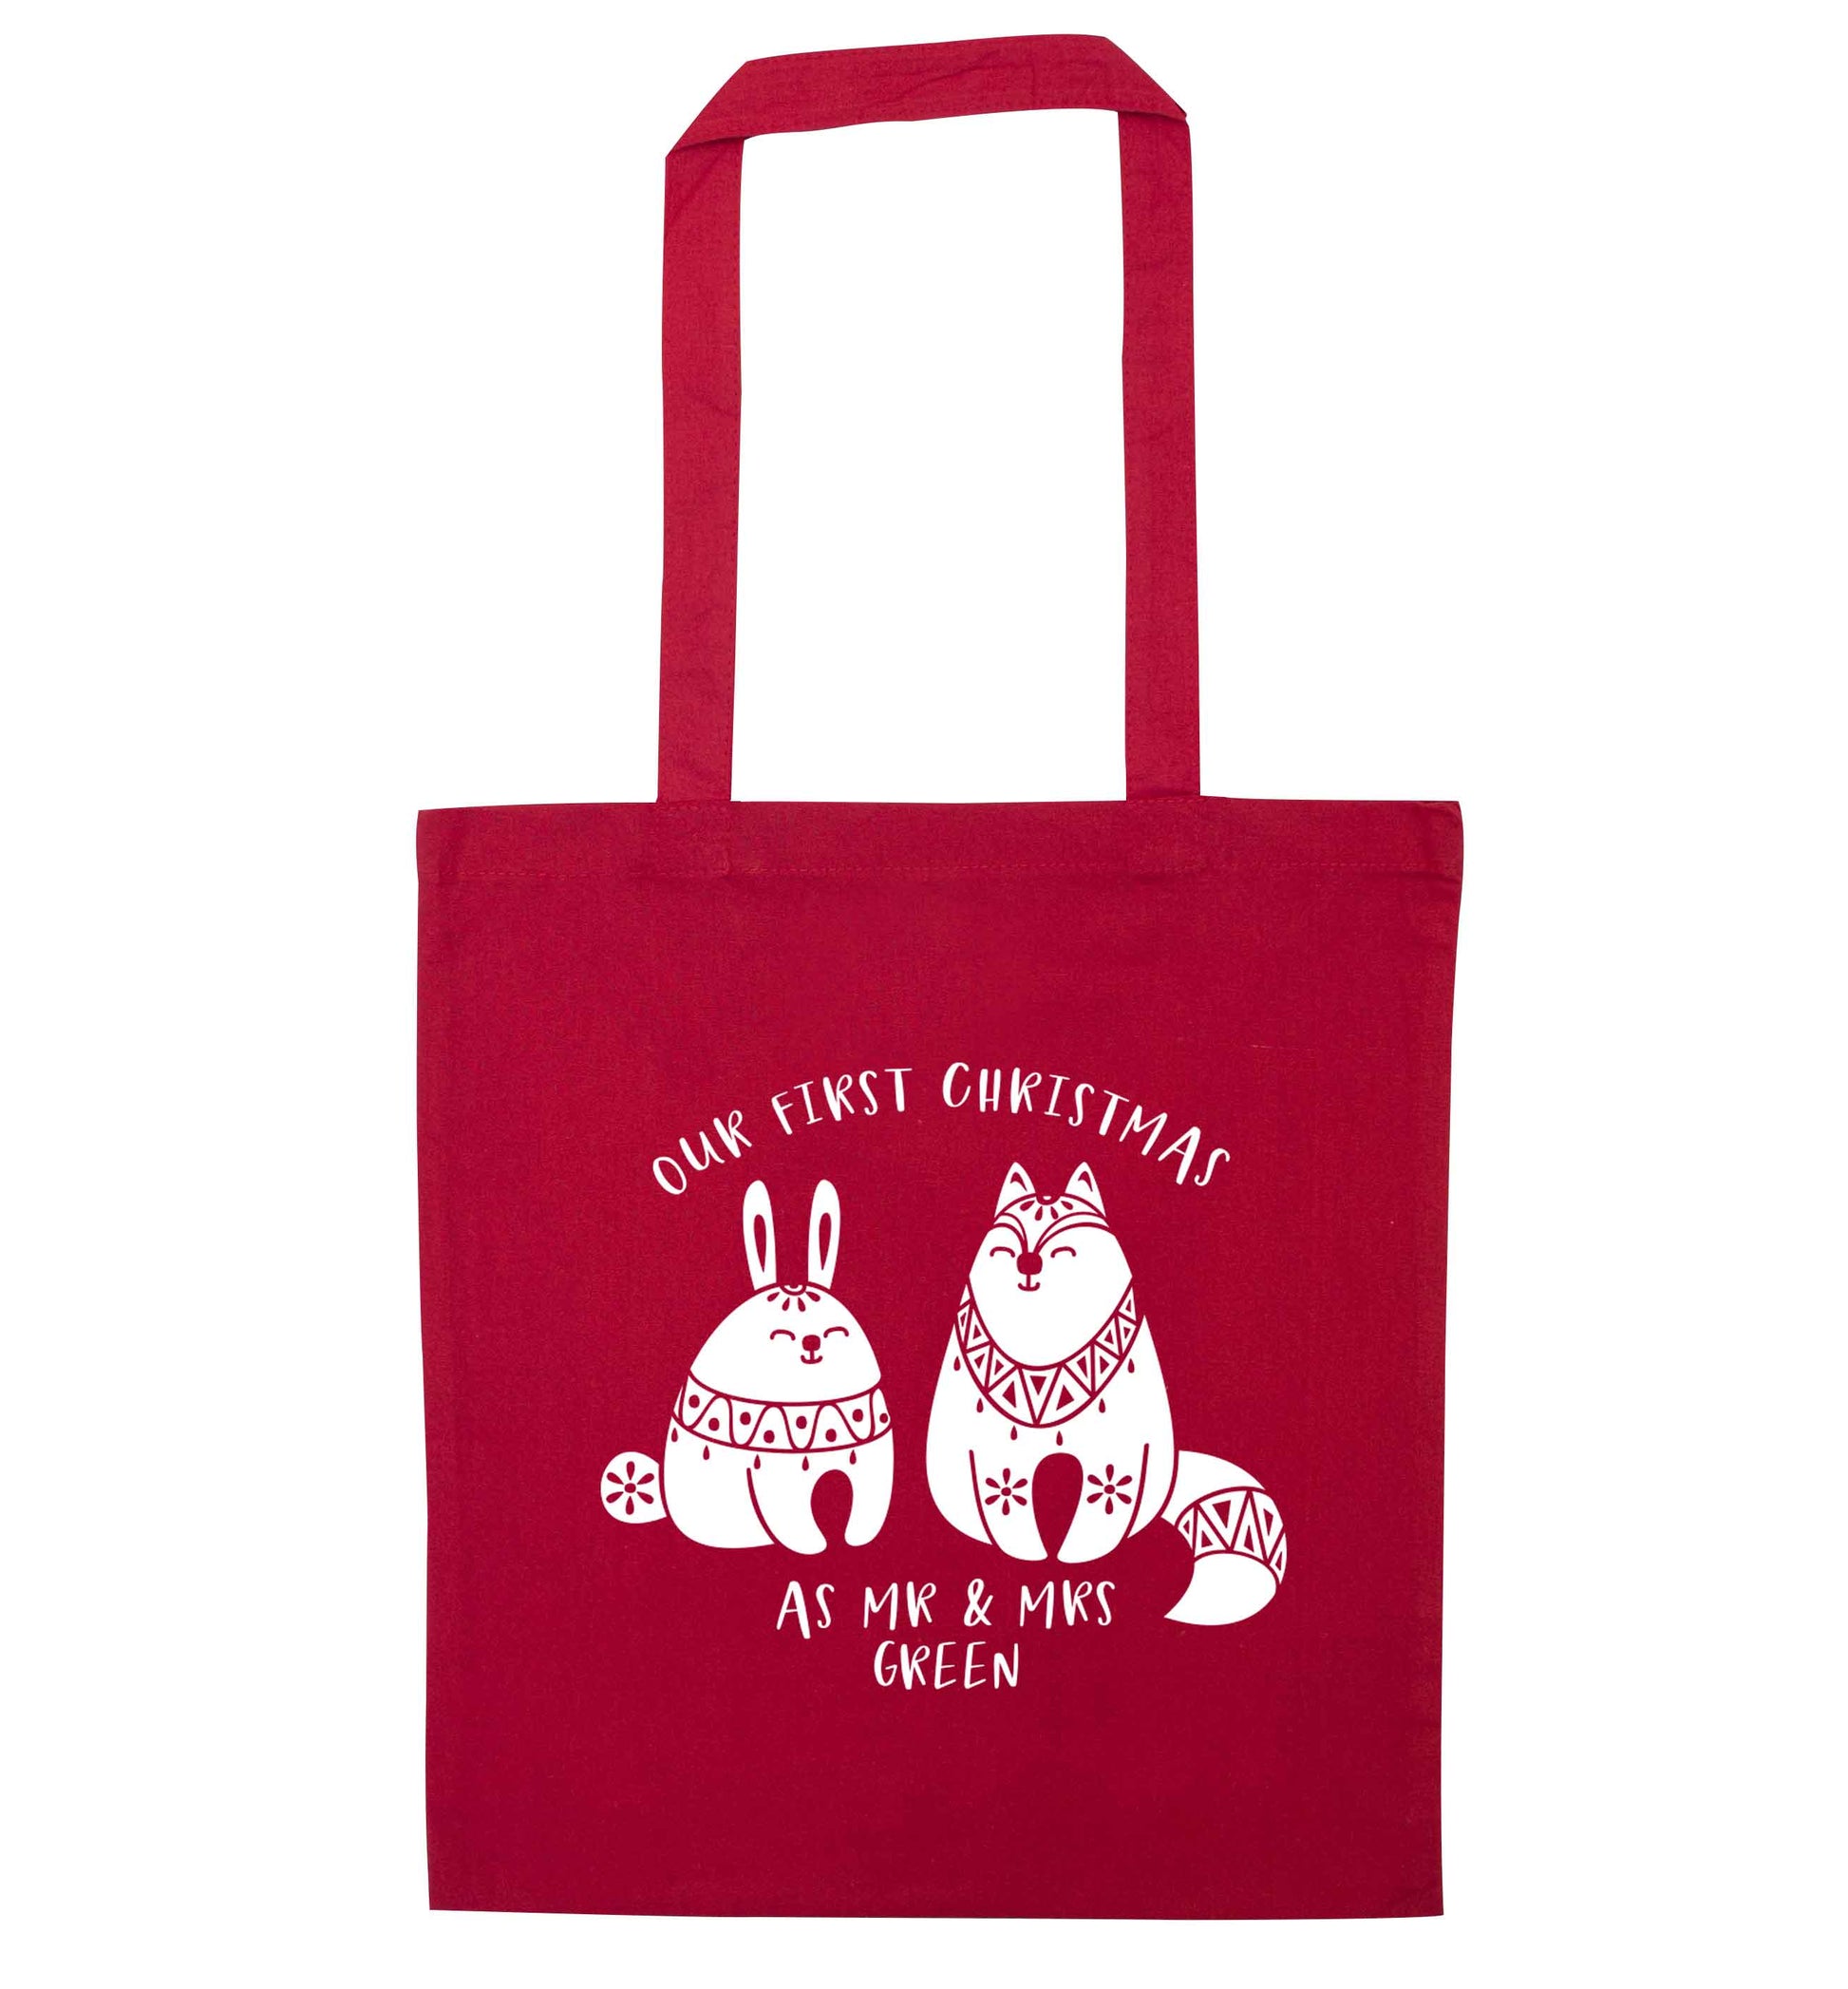 Our first Christmas as Mr & Mrs personalised red tote bag